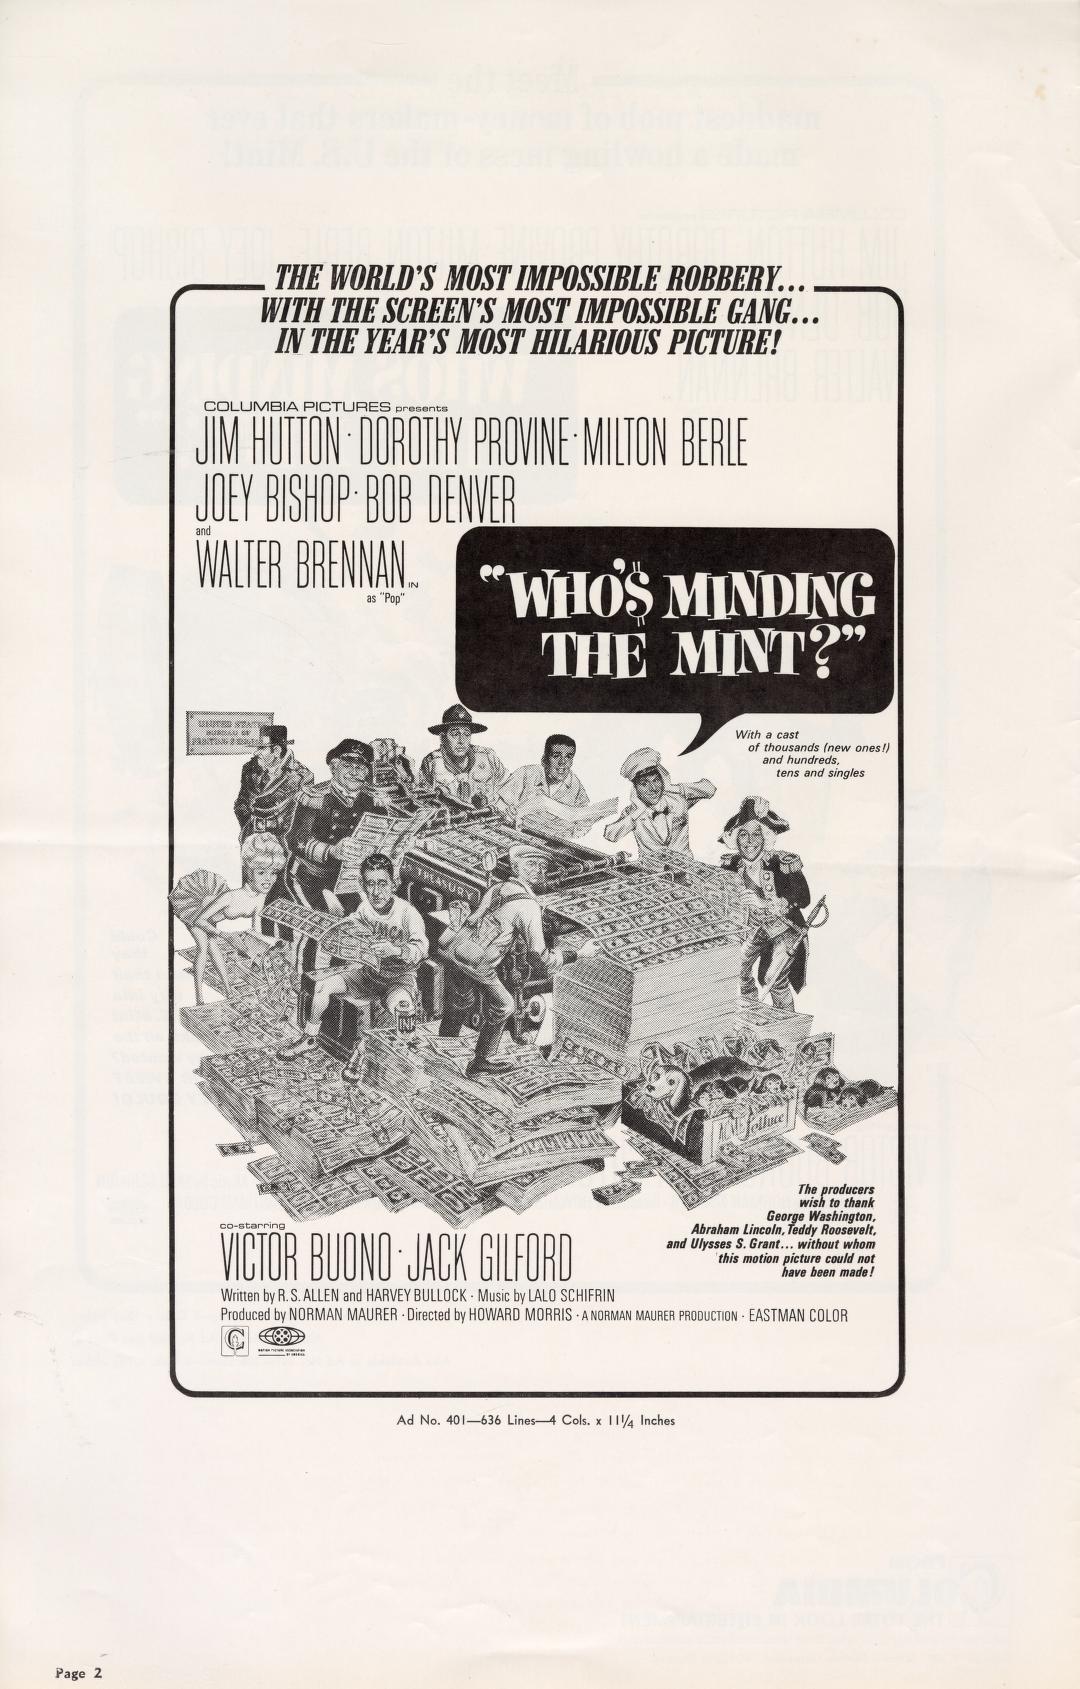 Who's Minding the Mint (Columbia Pictures Pressbook, 1967)